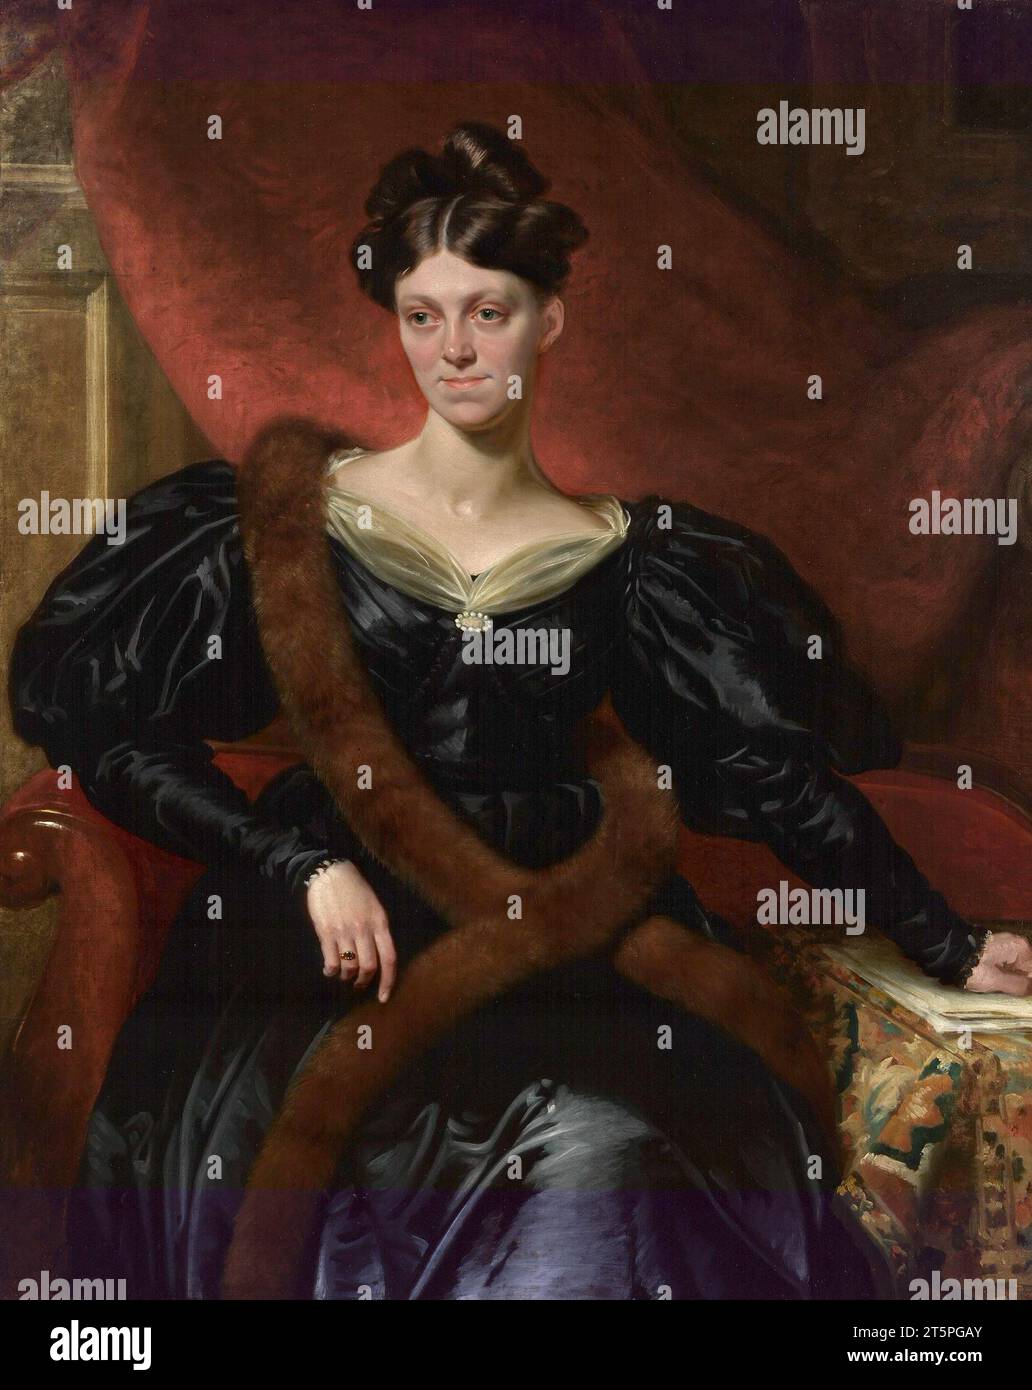 Harriet Martineau. Portrait of the English social theorist, Harriet Martineau (1802-1876) by Richard Evans, oil on canvas, c. 1834 Stock Photo